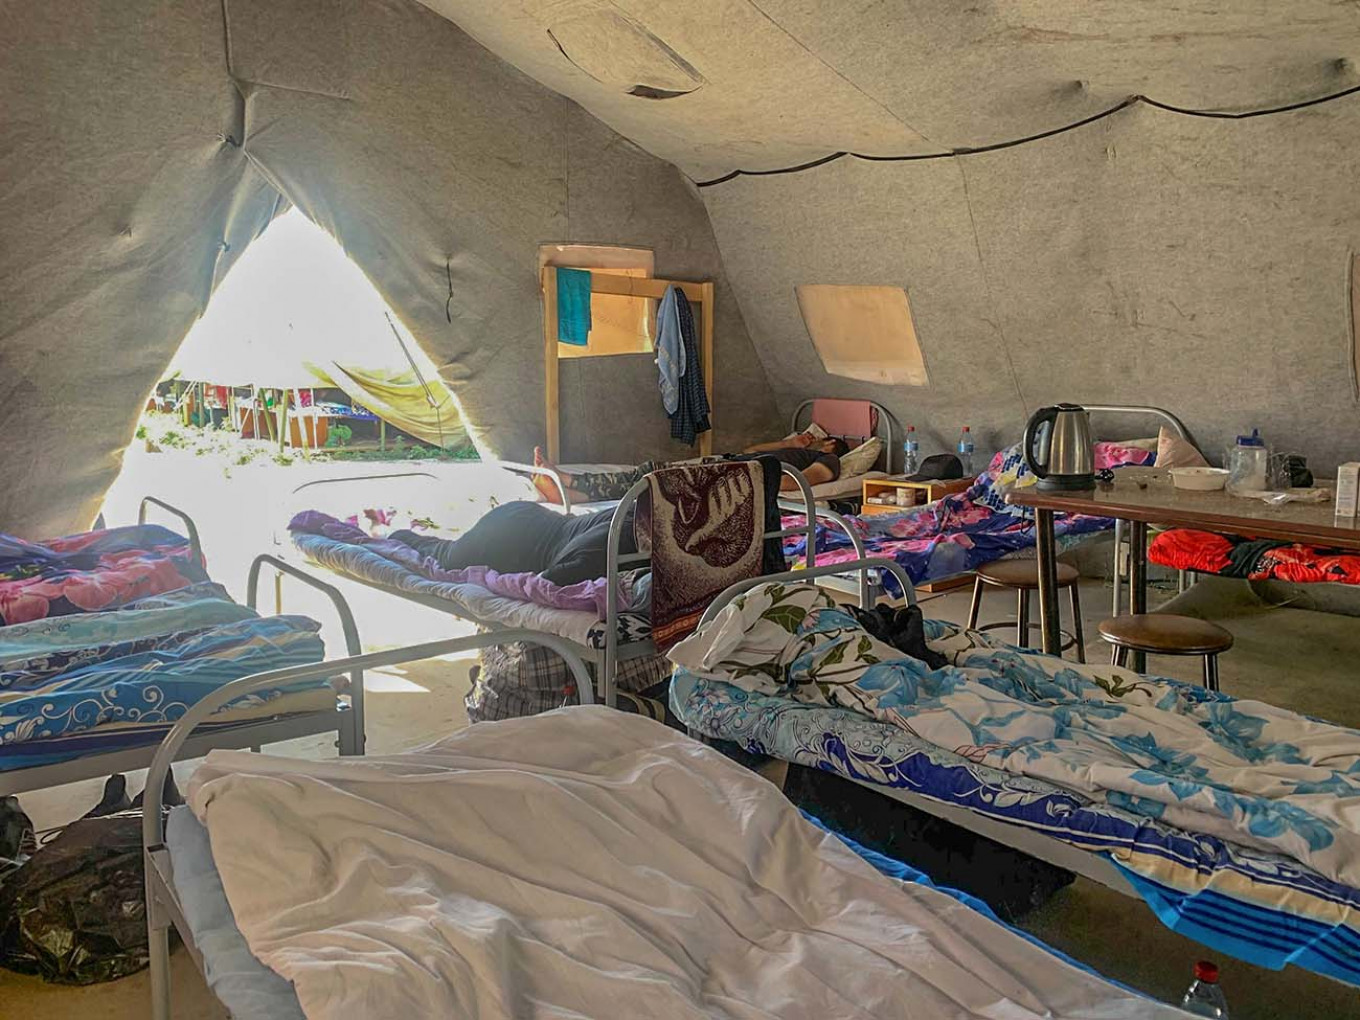 
					Rights groups worry that cramped living situations and a lack of medical care could exacerbate the spread of the coronavirus.					 					Evan Gershkovich / MT				